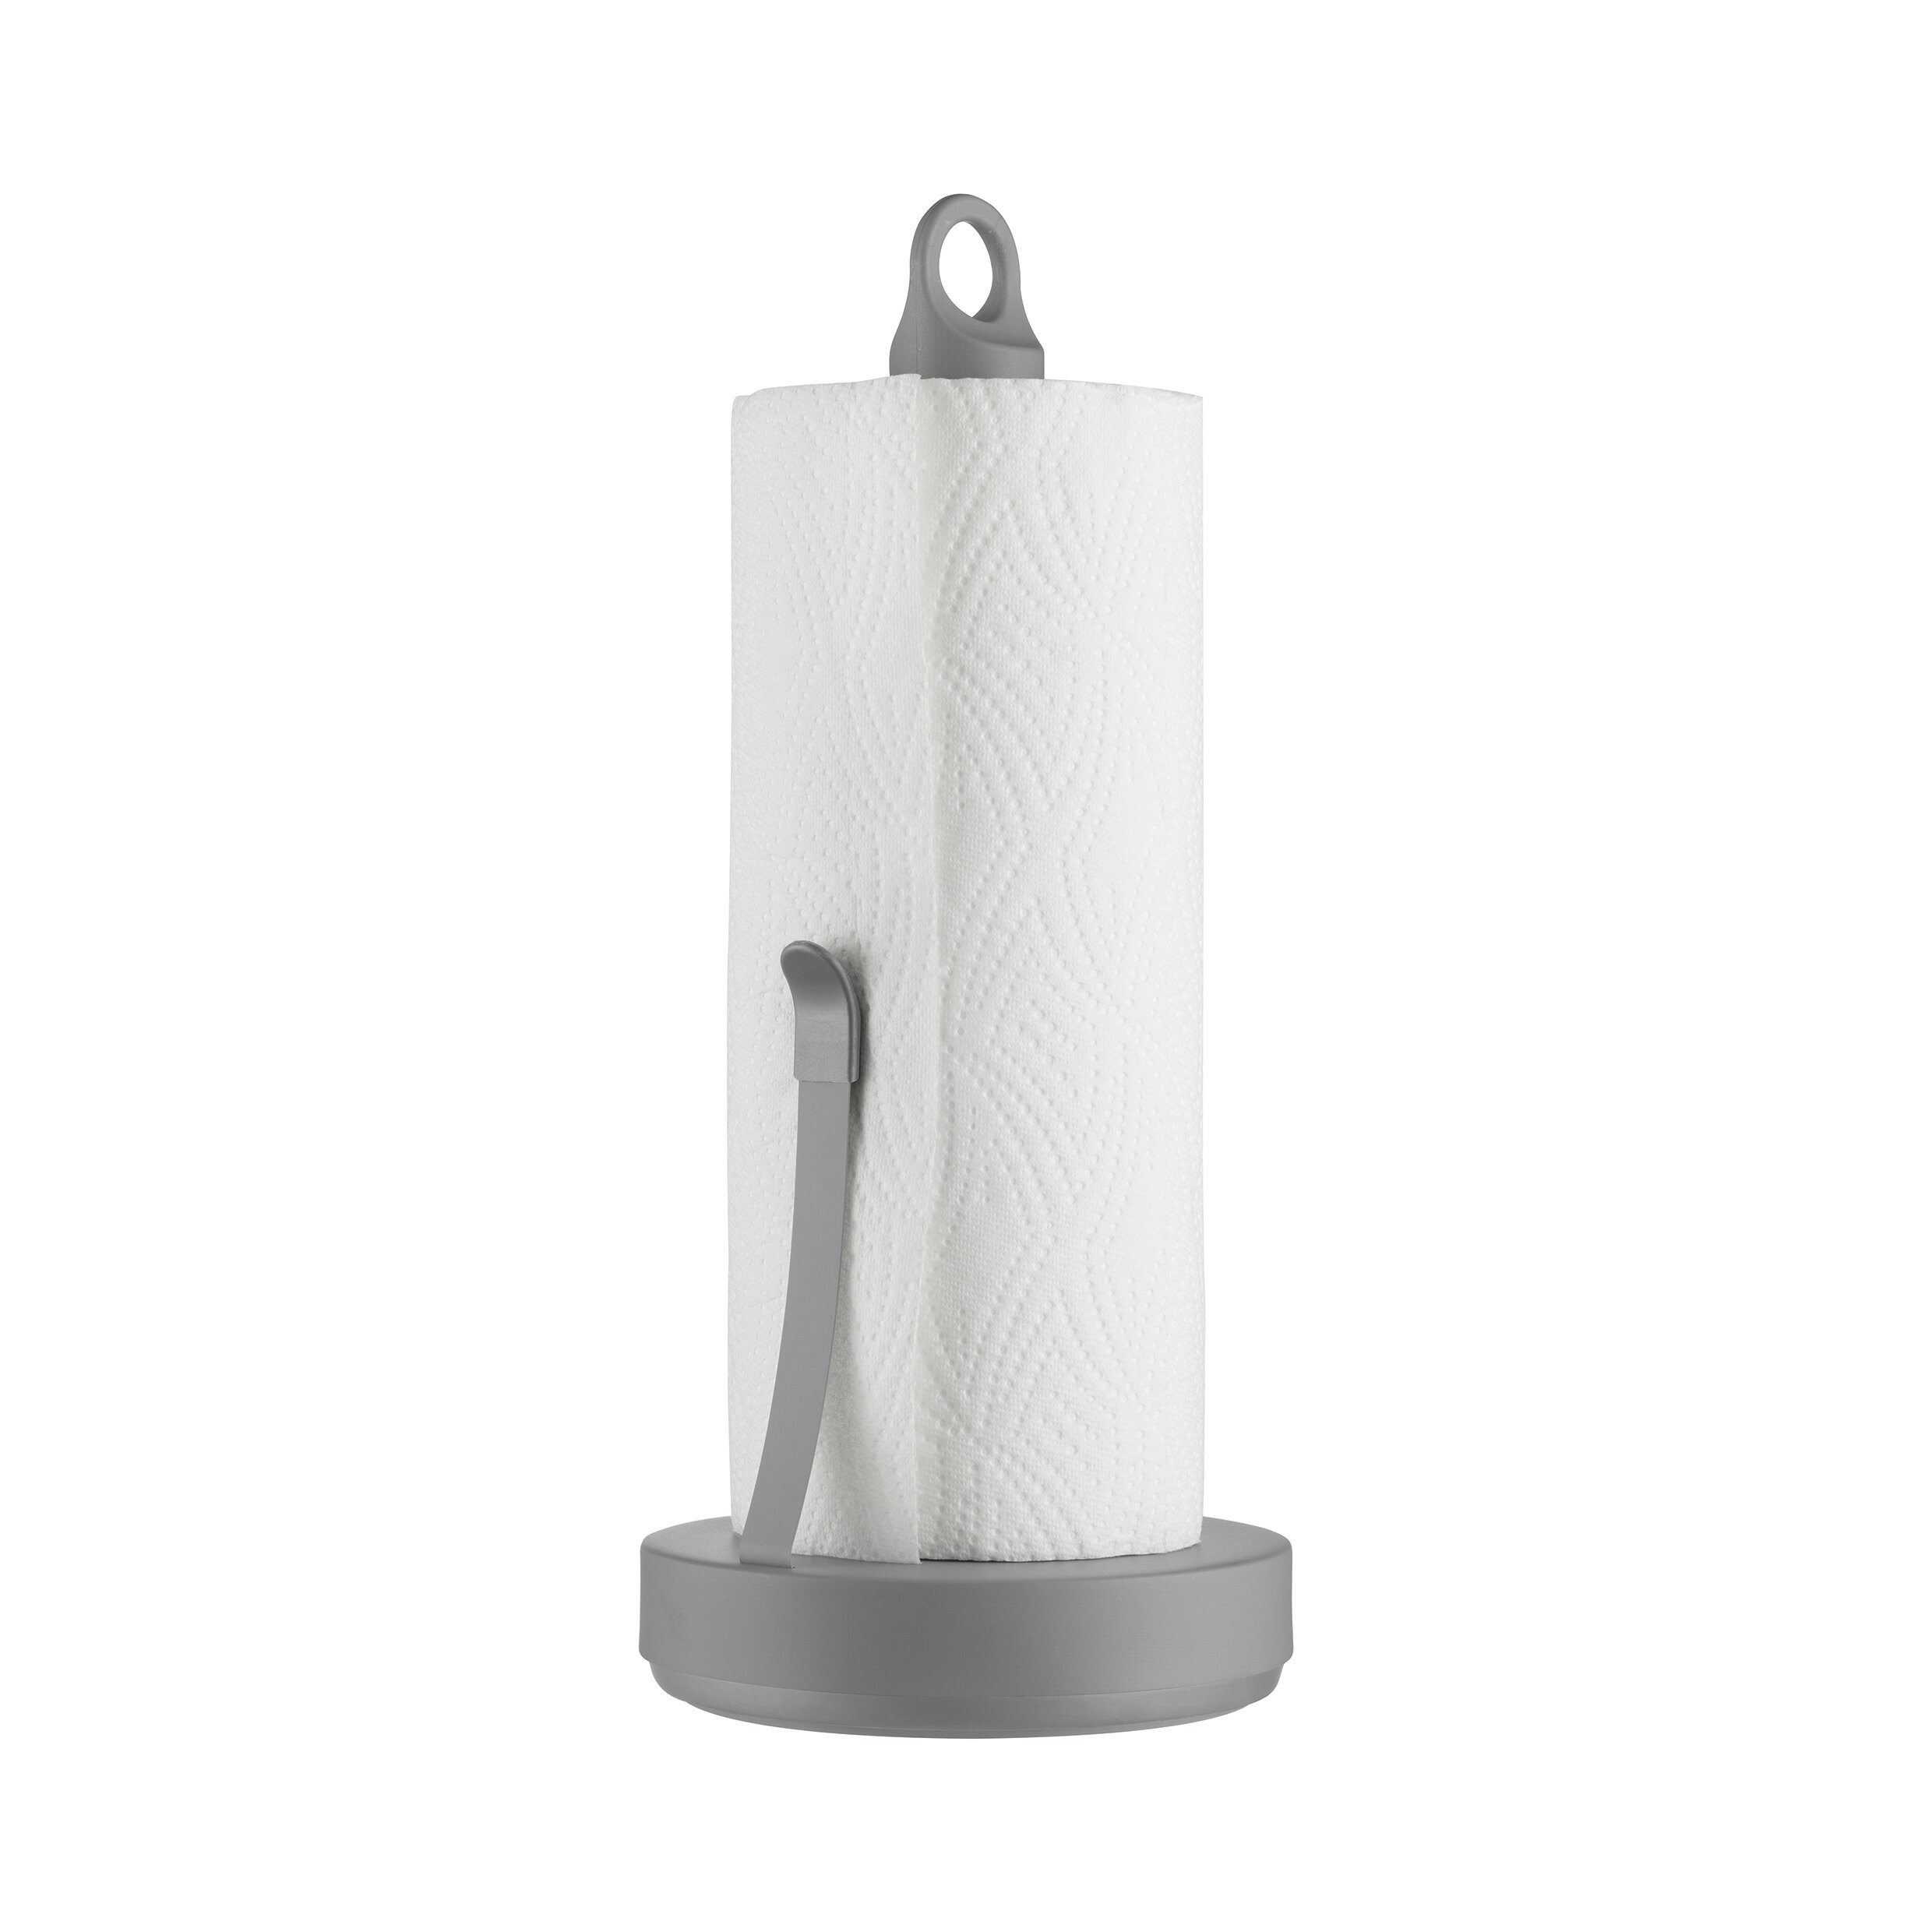 simplehuman Paper Towel Holder with Pump